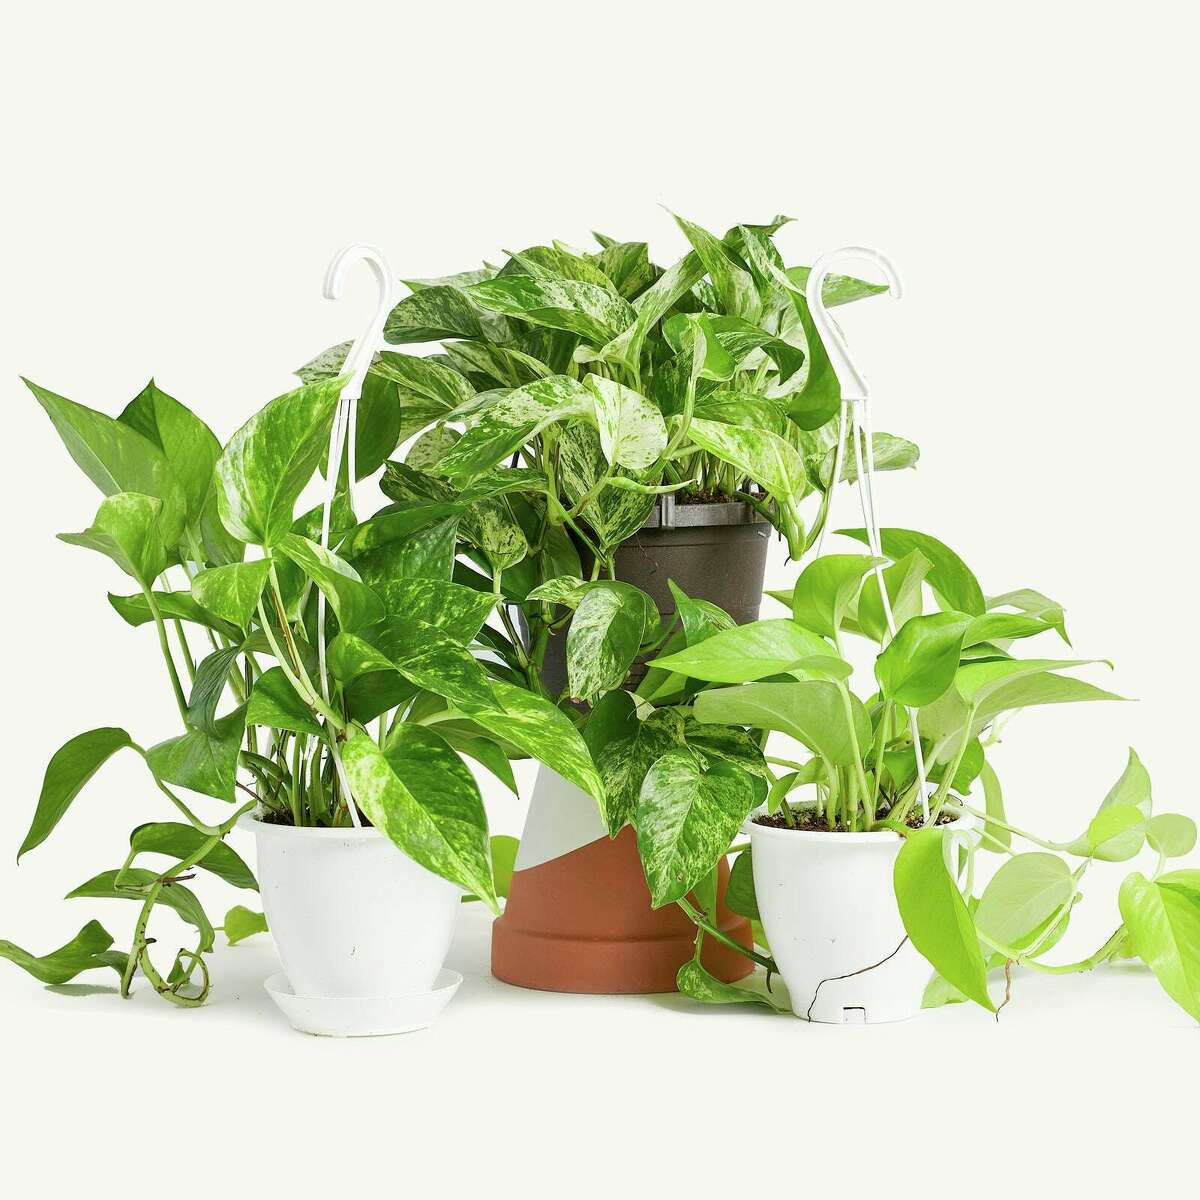 This image provided by the Horti houseplant subscription service shows golden (from left), marble and neon varieties of pothos plants.